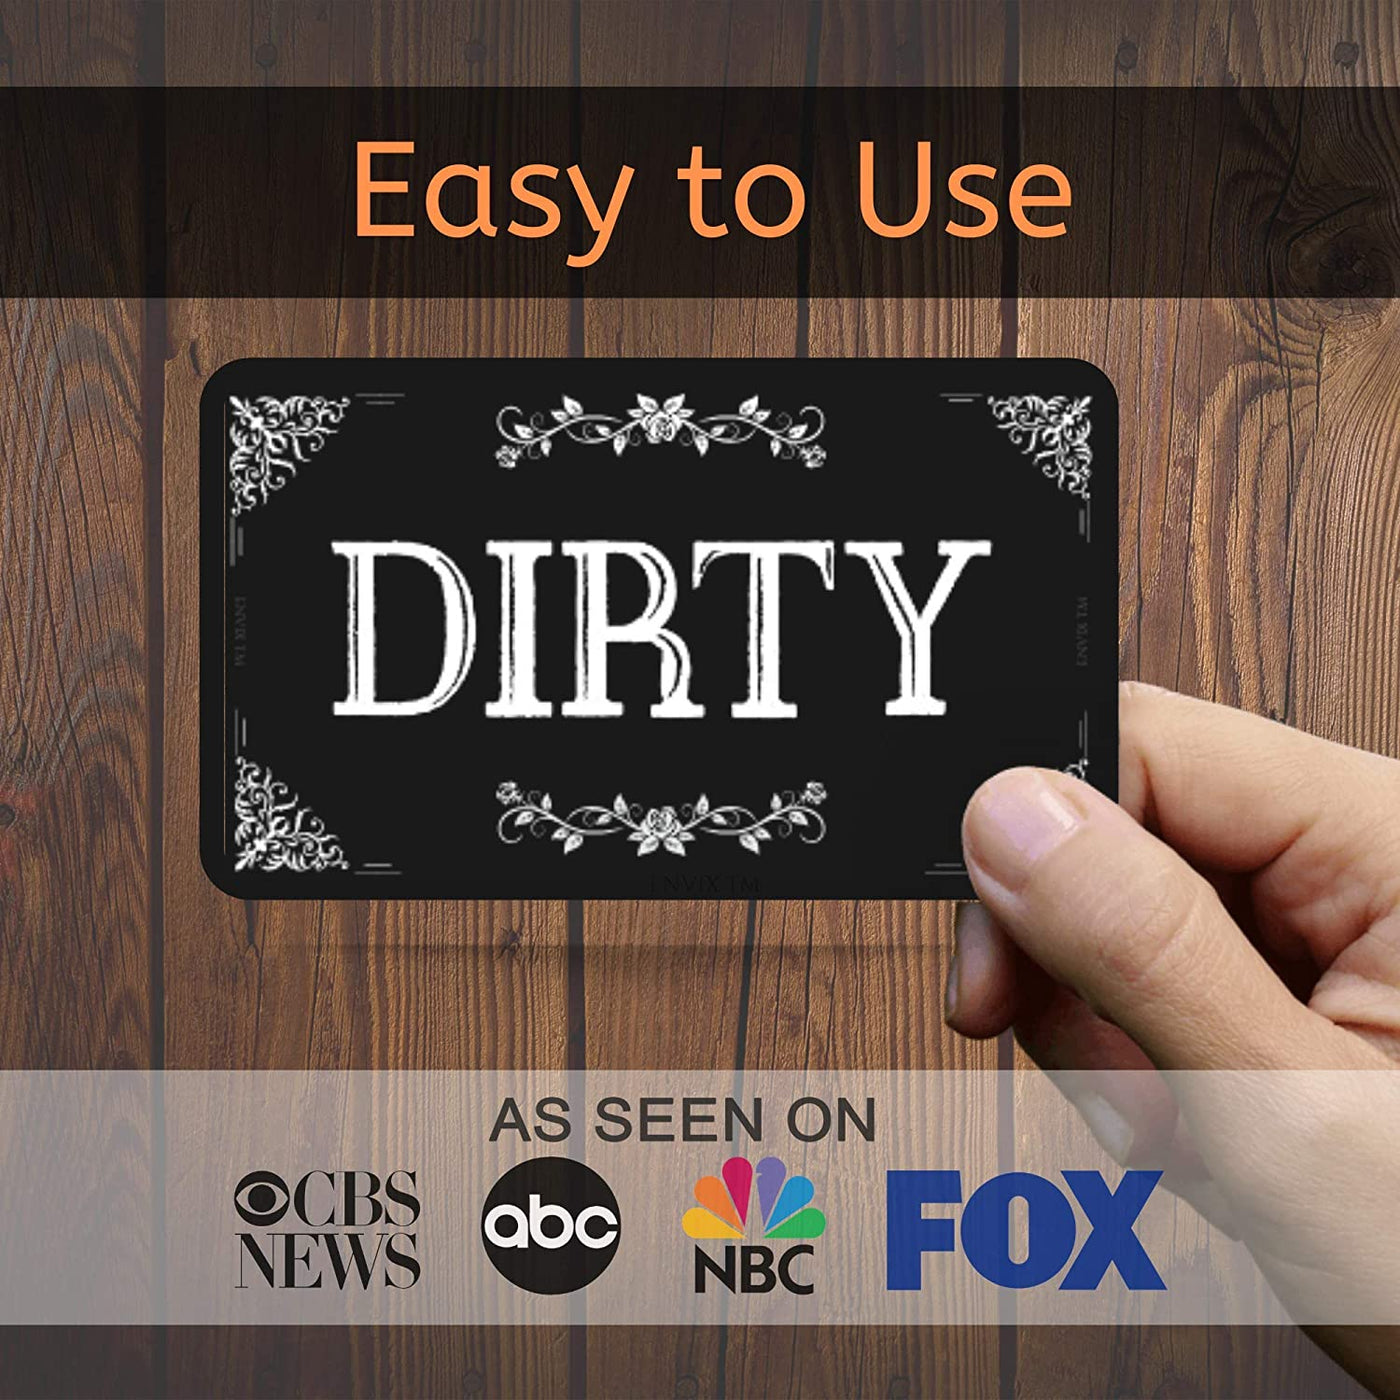 ENVIX Dishwasher Magnet Clean Dirty Sign Double Sided Magnet Flip with Magnetic Plate Kitchen Dish Washer Reversible Indicator Black Chalkboard